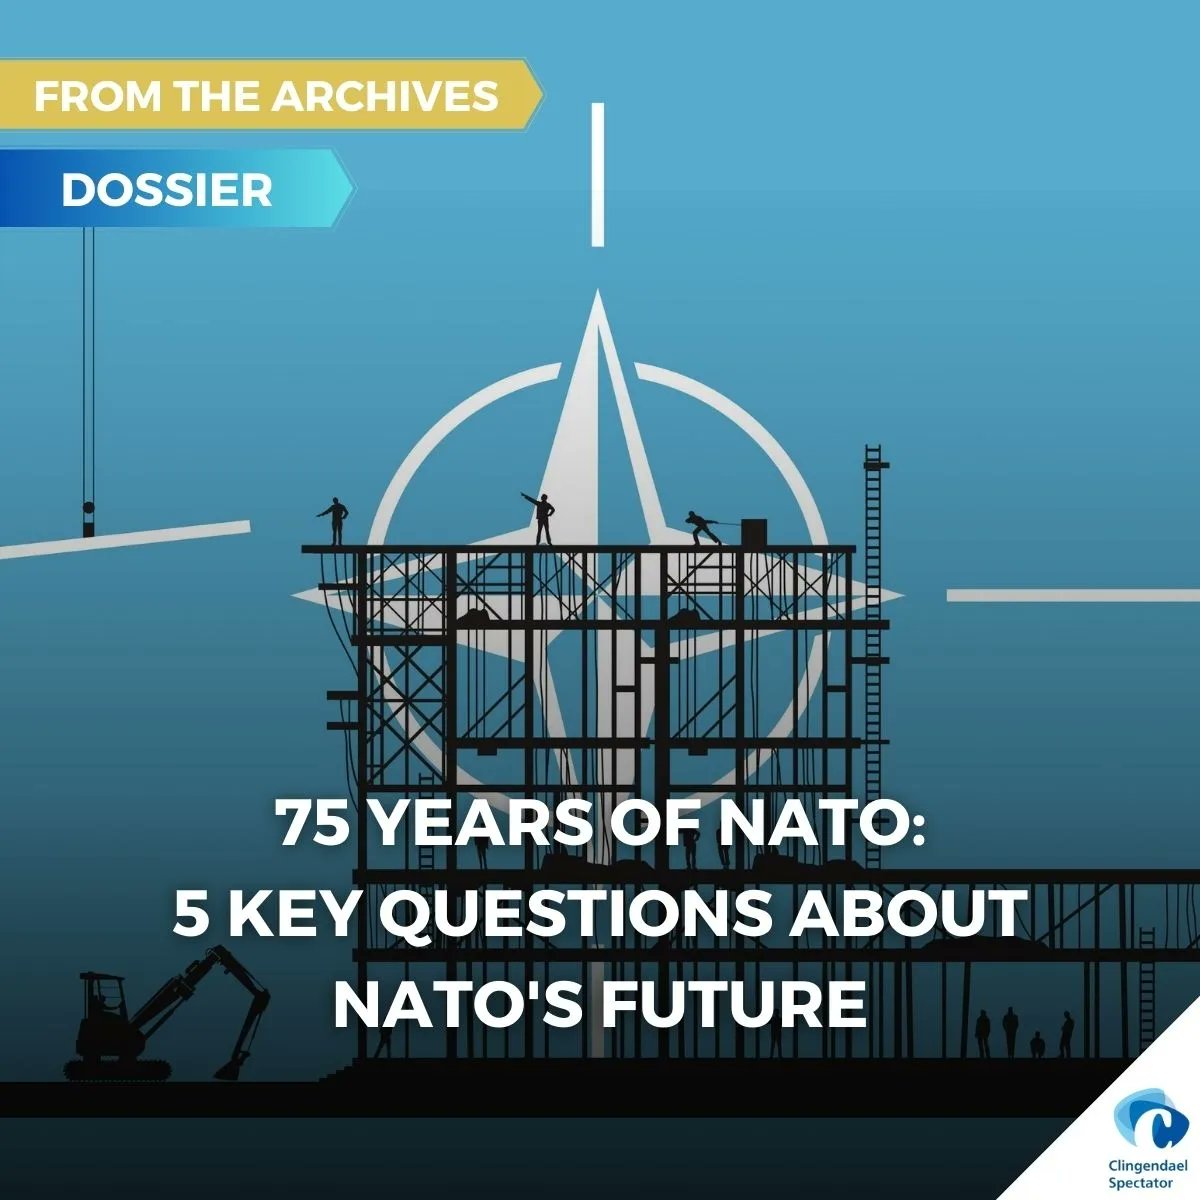 Today, NATO celebrates its 75th birthday. Two years ago, @Clingendaelorg's magazine posed 5 key questions on NATO's future to 12 international experts. Revisit their insights on the purpose and fundamental tasks of the Alliance in our dossier: spectator.clingendael.org/nl/dossier/nat…